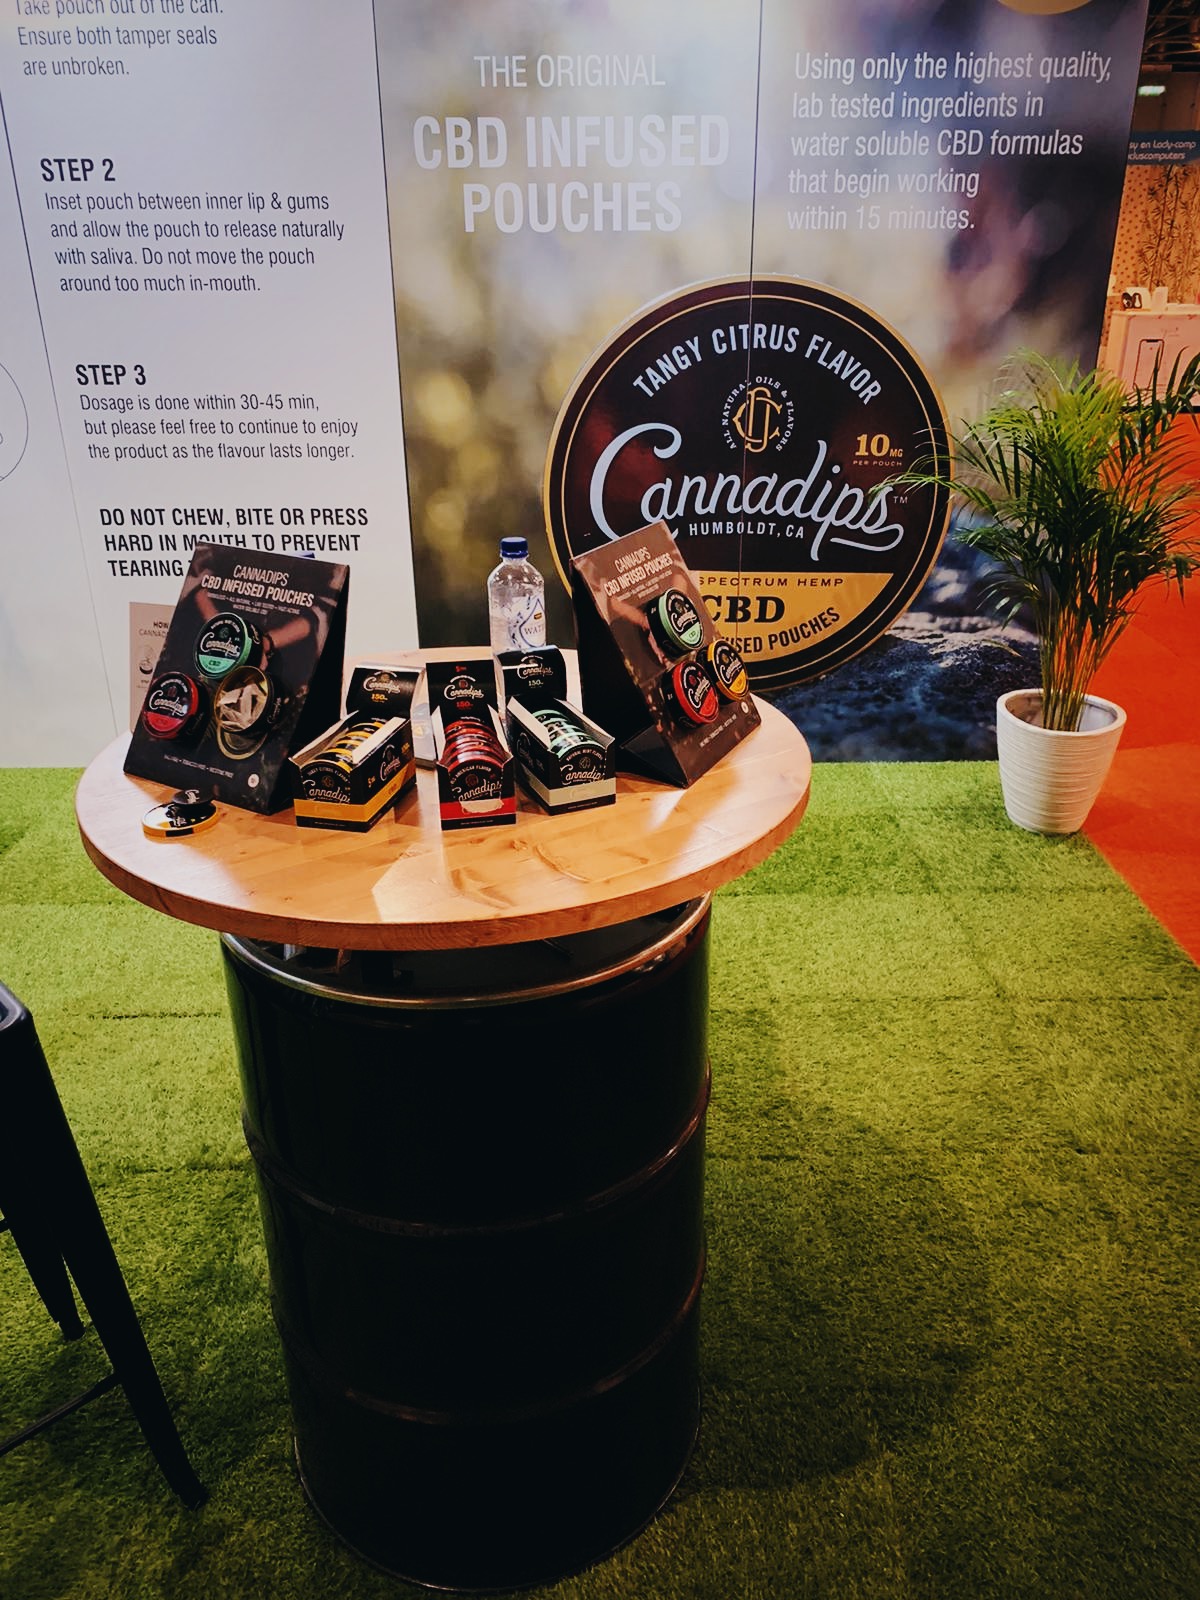 Cannadips Europe in-mouth CBD pouches being displayed.